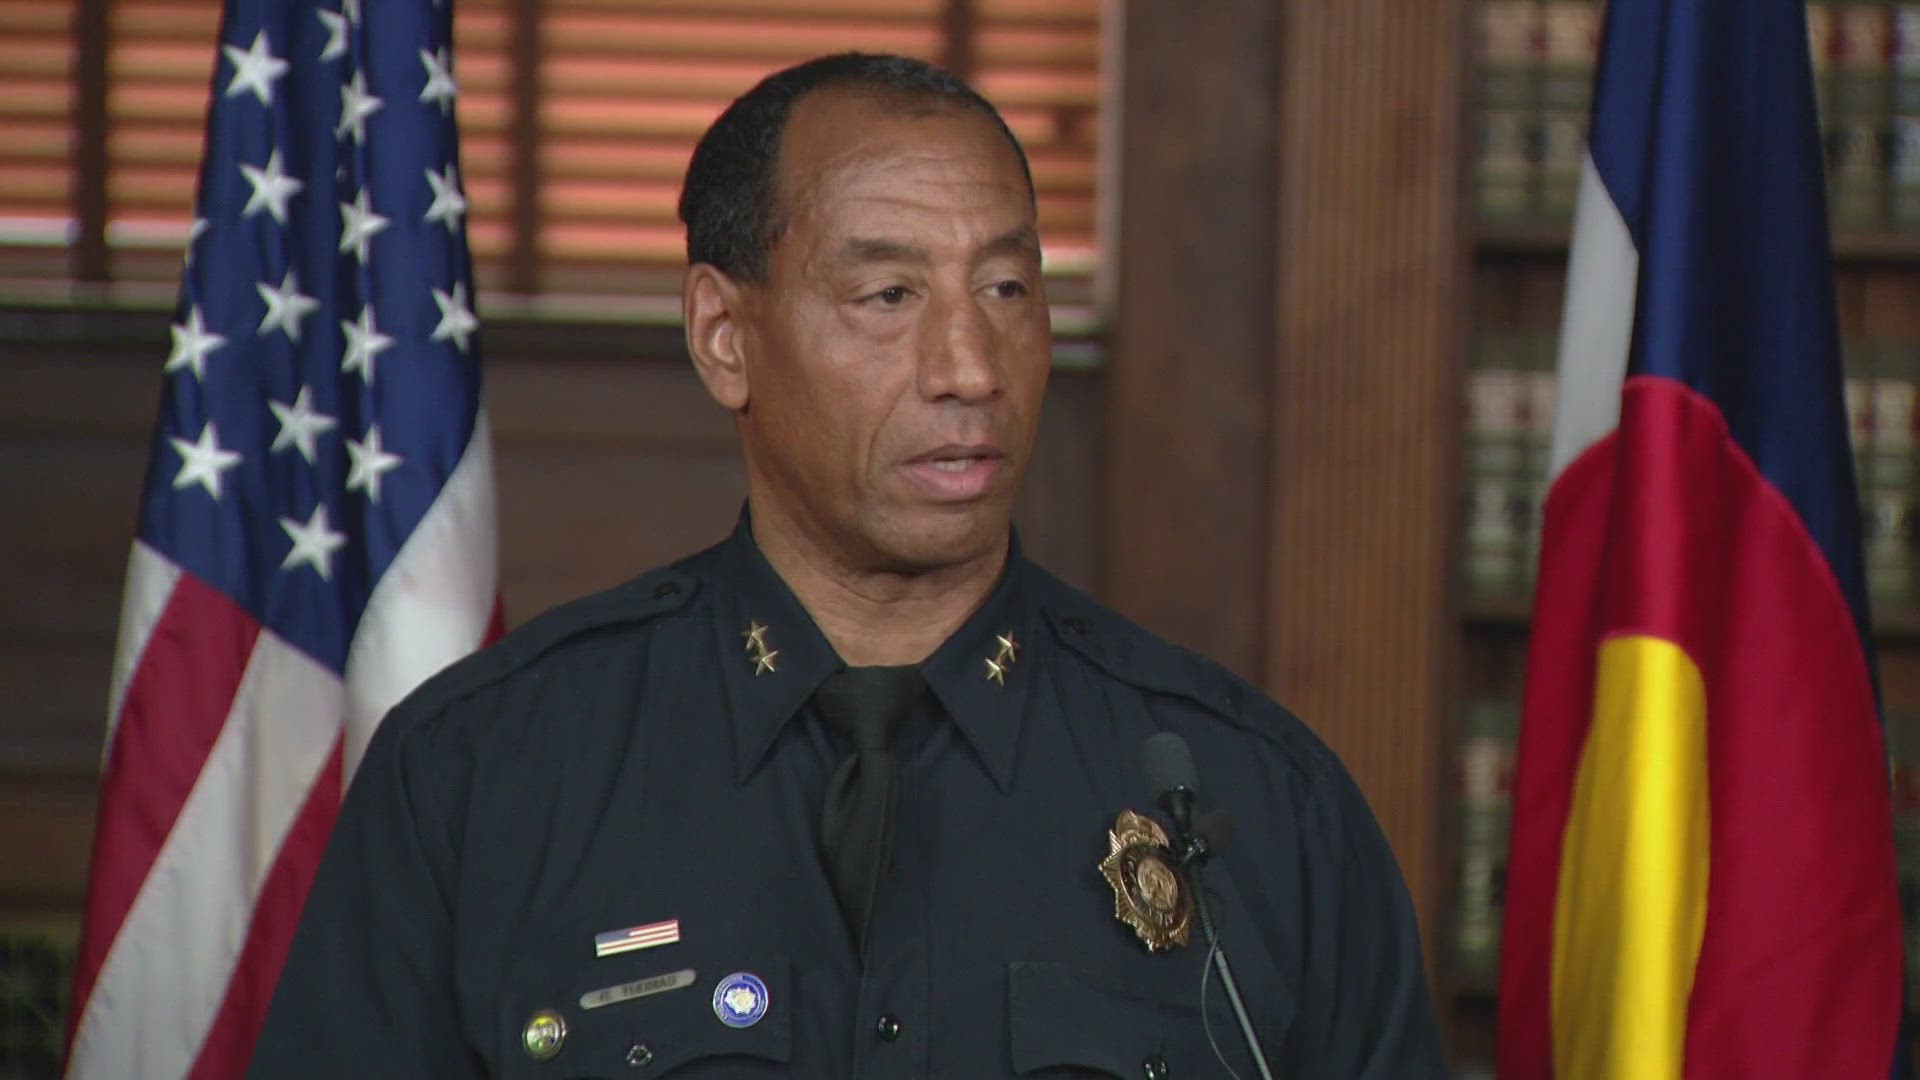 Hancock named Ron Thomas, DPD's current division chief of patrol, as his nominee to be the next chief.